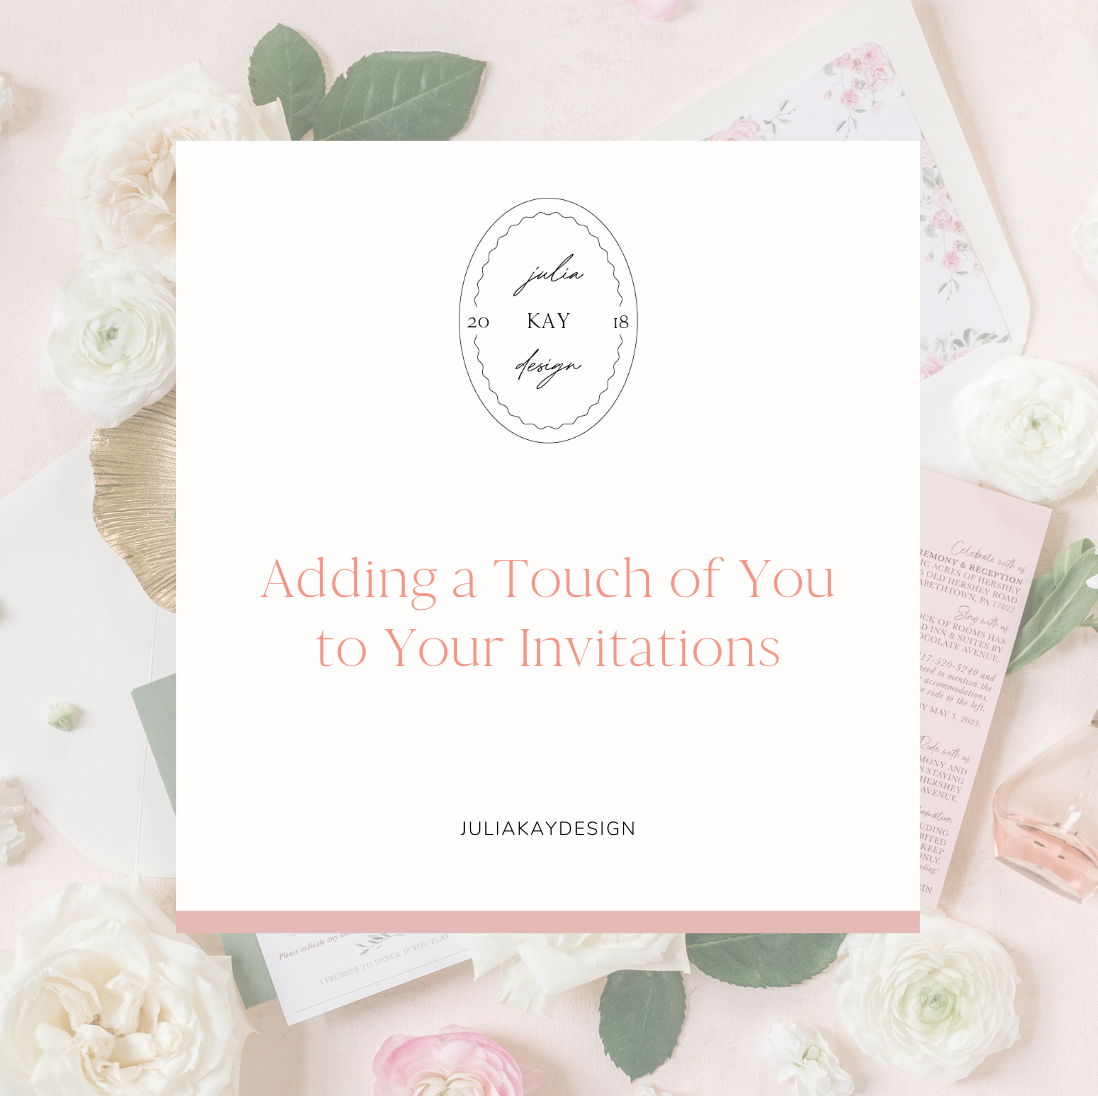 Adding a Touch of You to Your Invitations